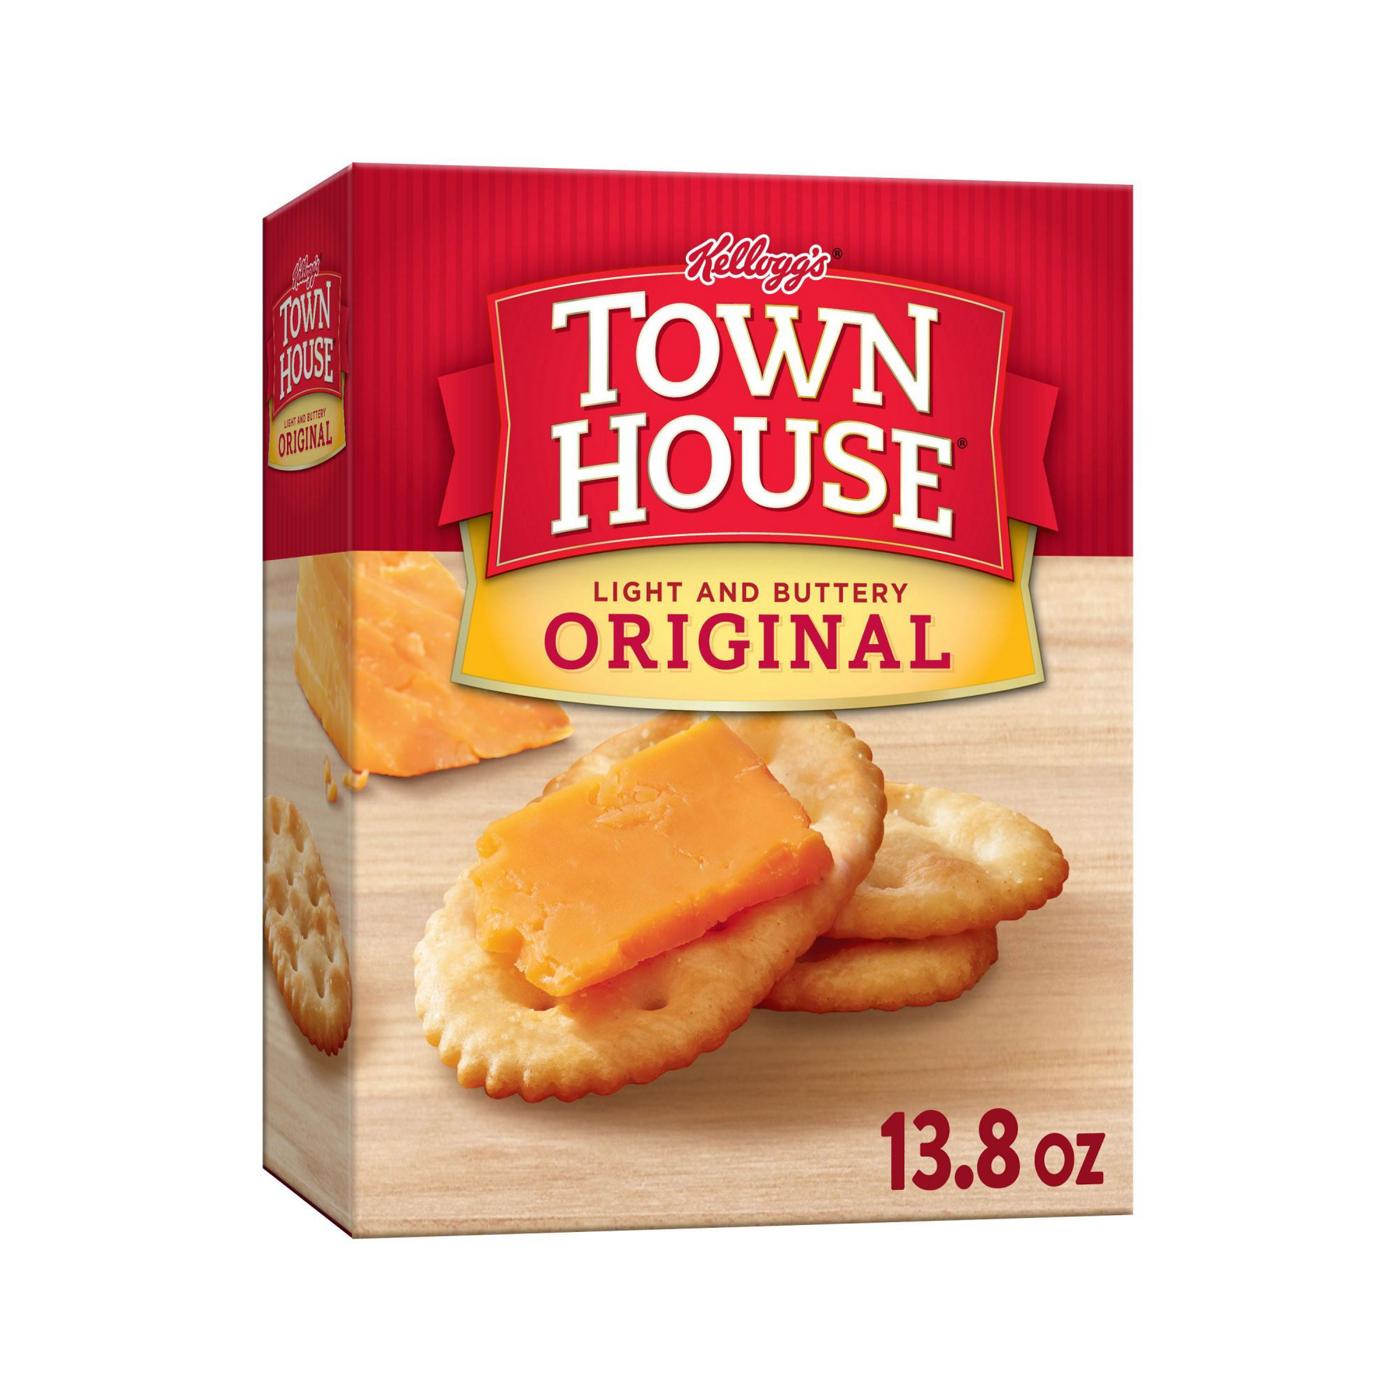 Town House Original Oven Baked Crackers; image 1 of 6